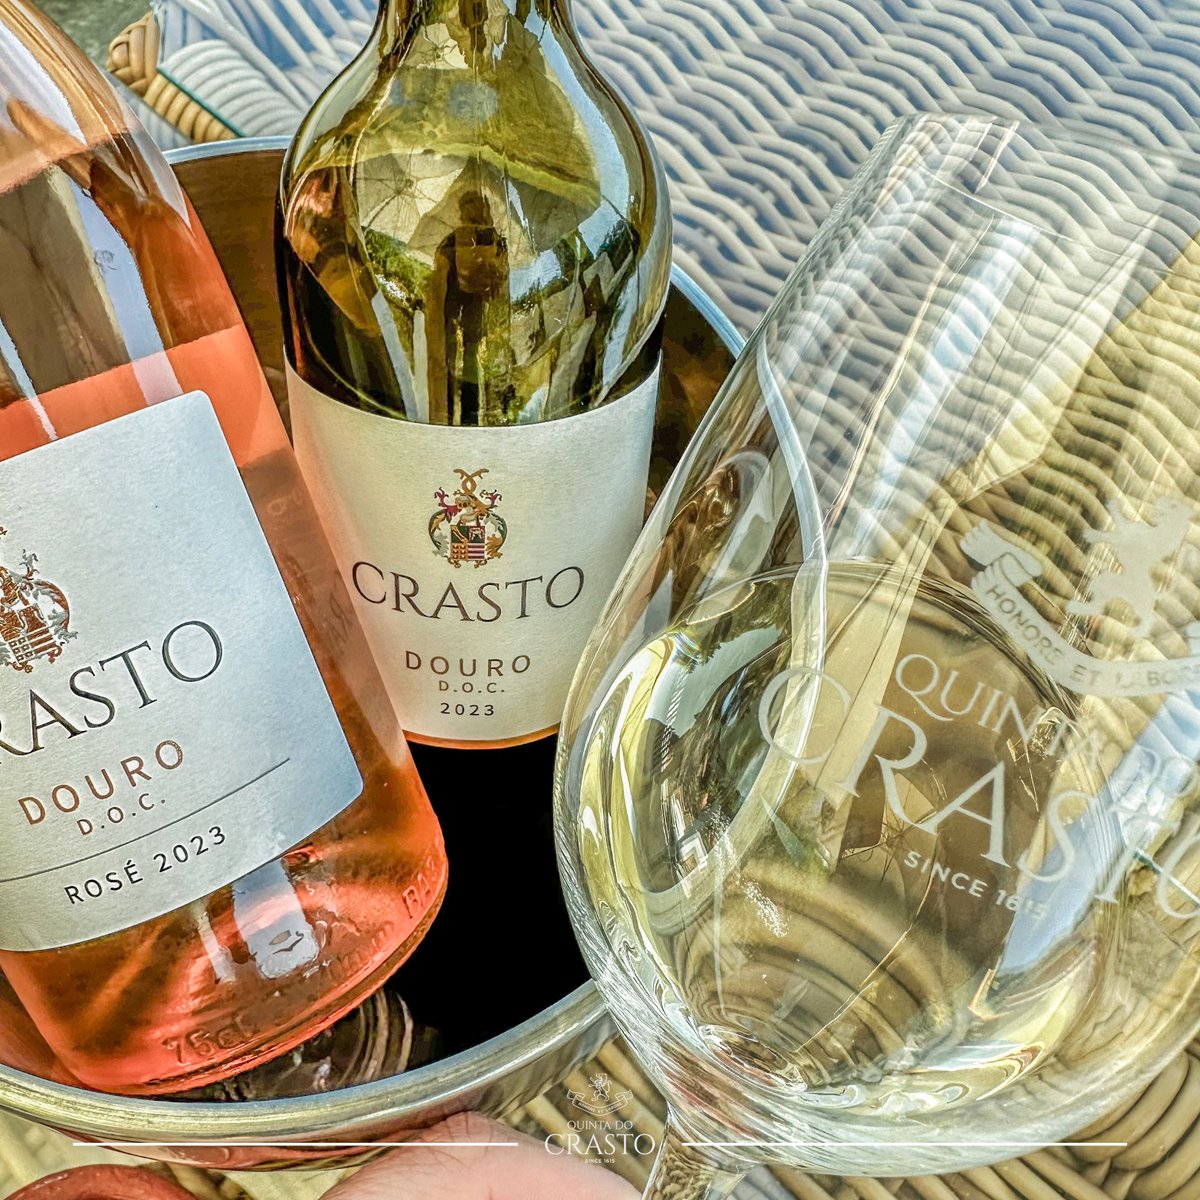 #CrastoRosé 2023 and #CrastoWhite 2023, two faithful companions of well-spent afternoons and experiences that stay forever in memory. 🍷
👉🏼 Learn more here: quintadocrasto.pt/products/?lang…
👉🏼 Be sure to look for your favourite #wine in your usual #restaurant or #wineshop. 🍷#DouroWines